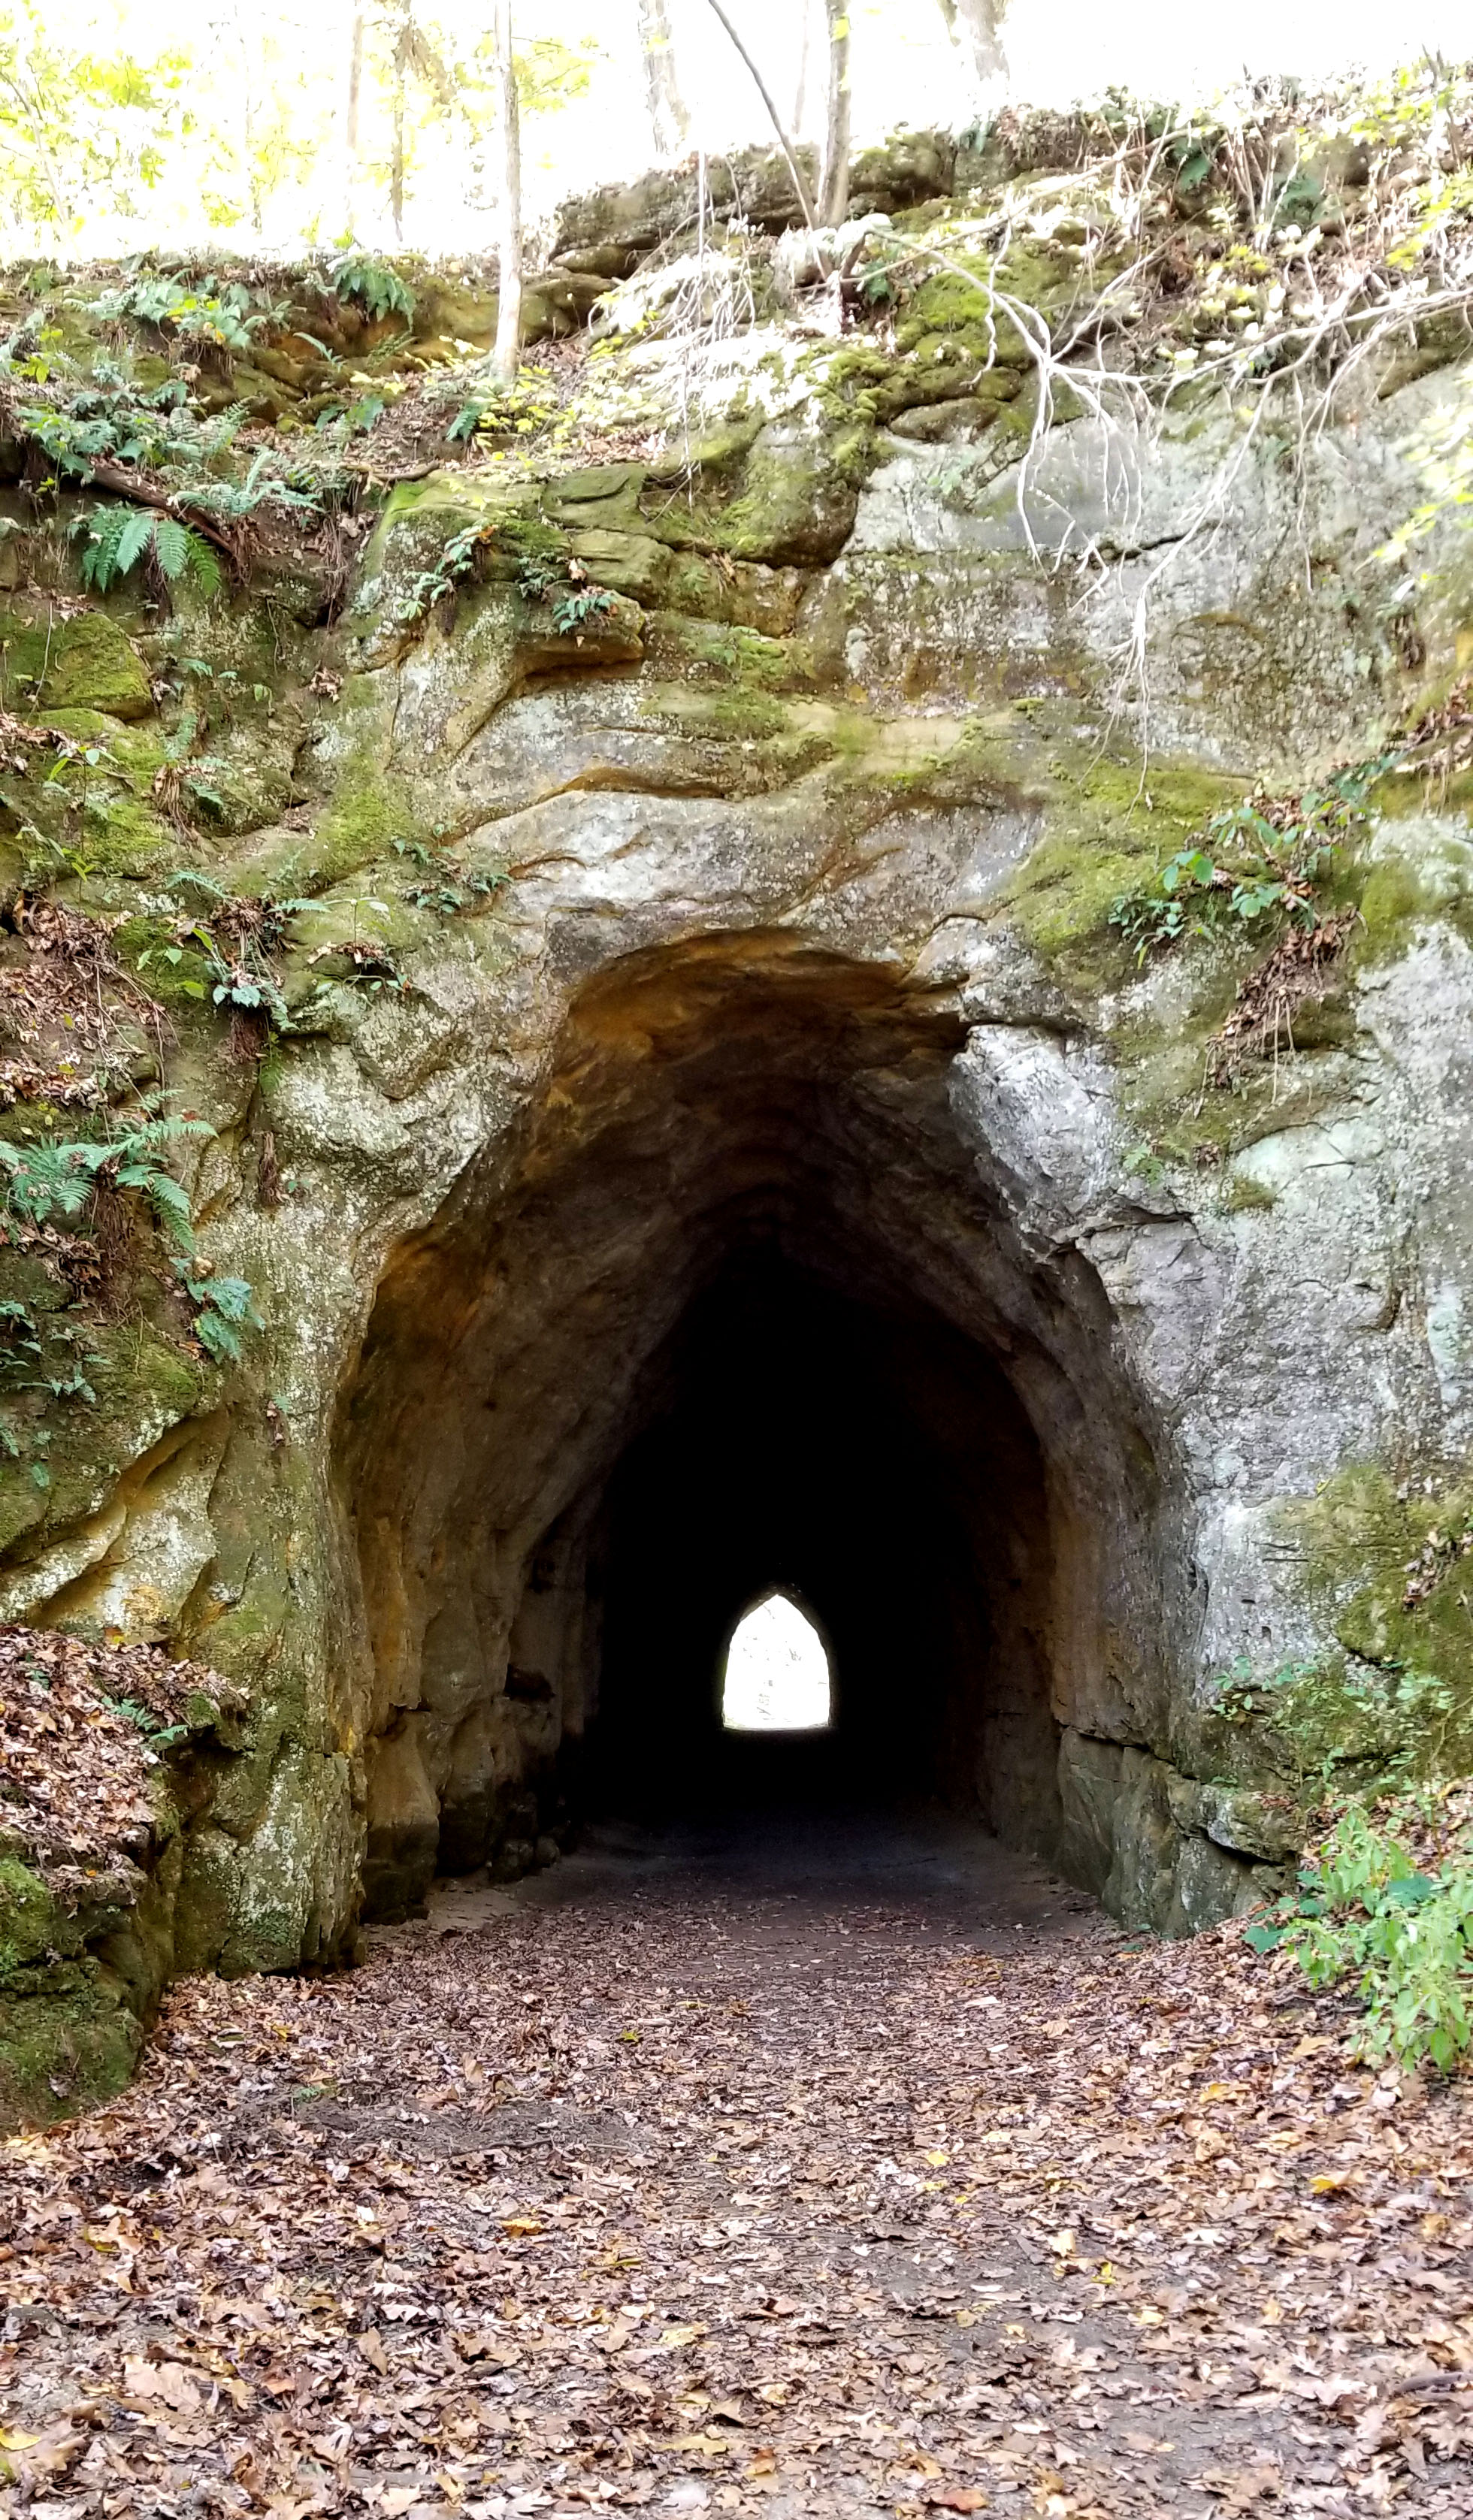 A tunnel blasted through solid rock for an electric interurban train at Blackhand Gorge.